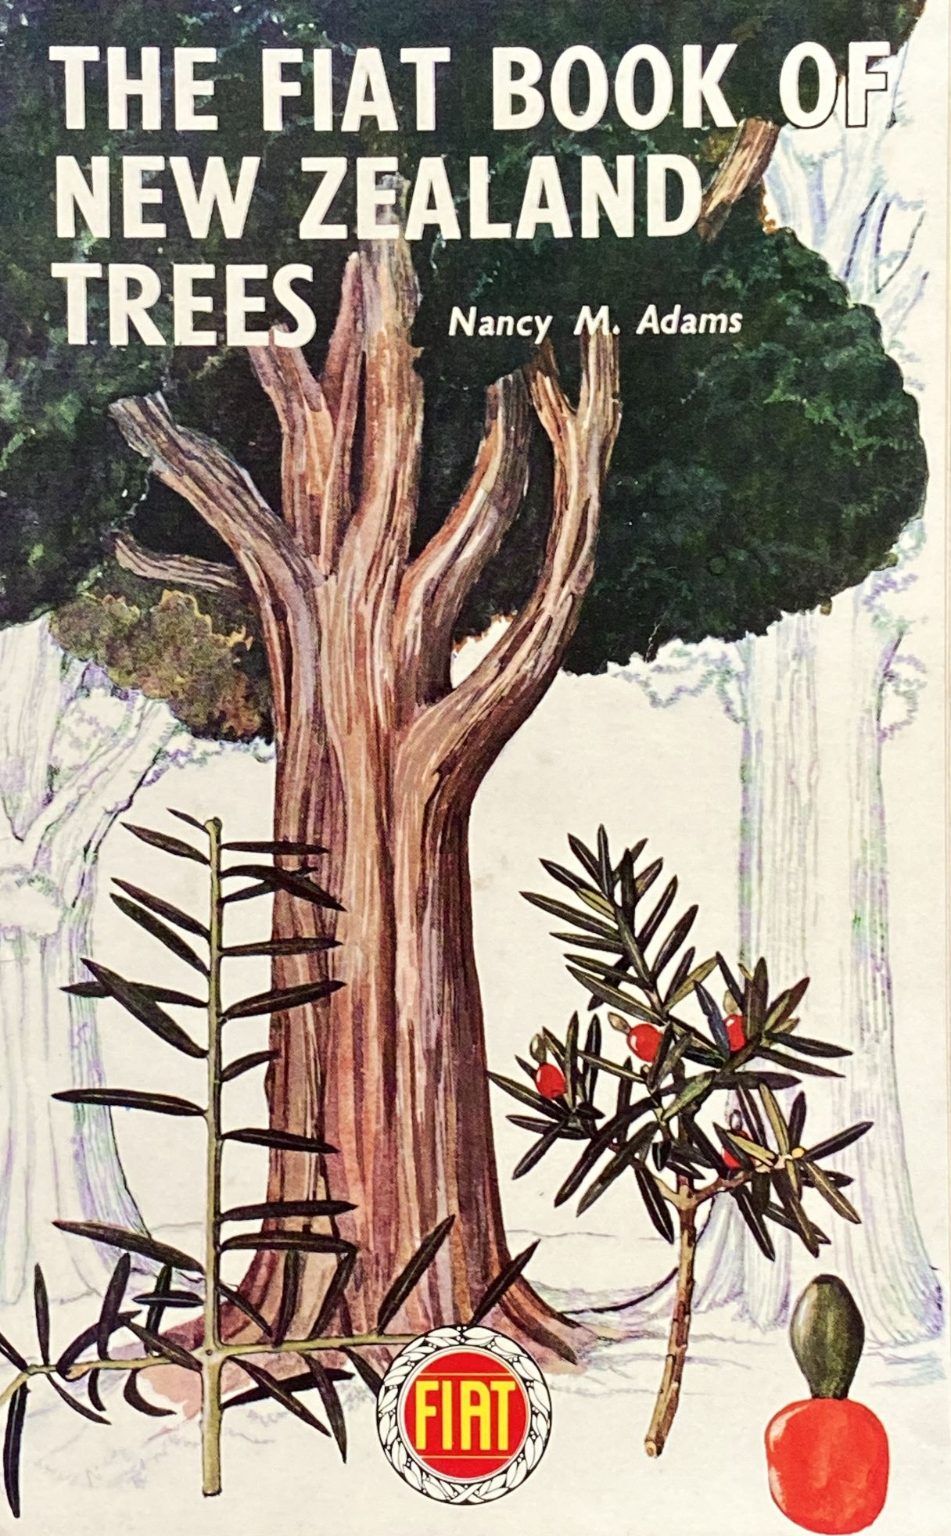 THE FIAT BOOK OF NEW ZEALAND TREES